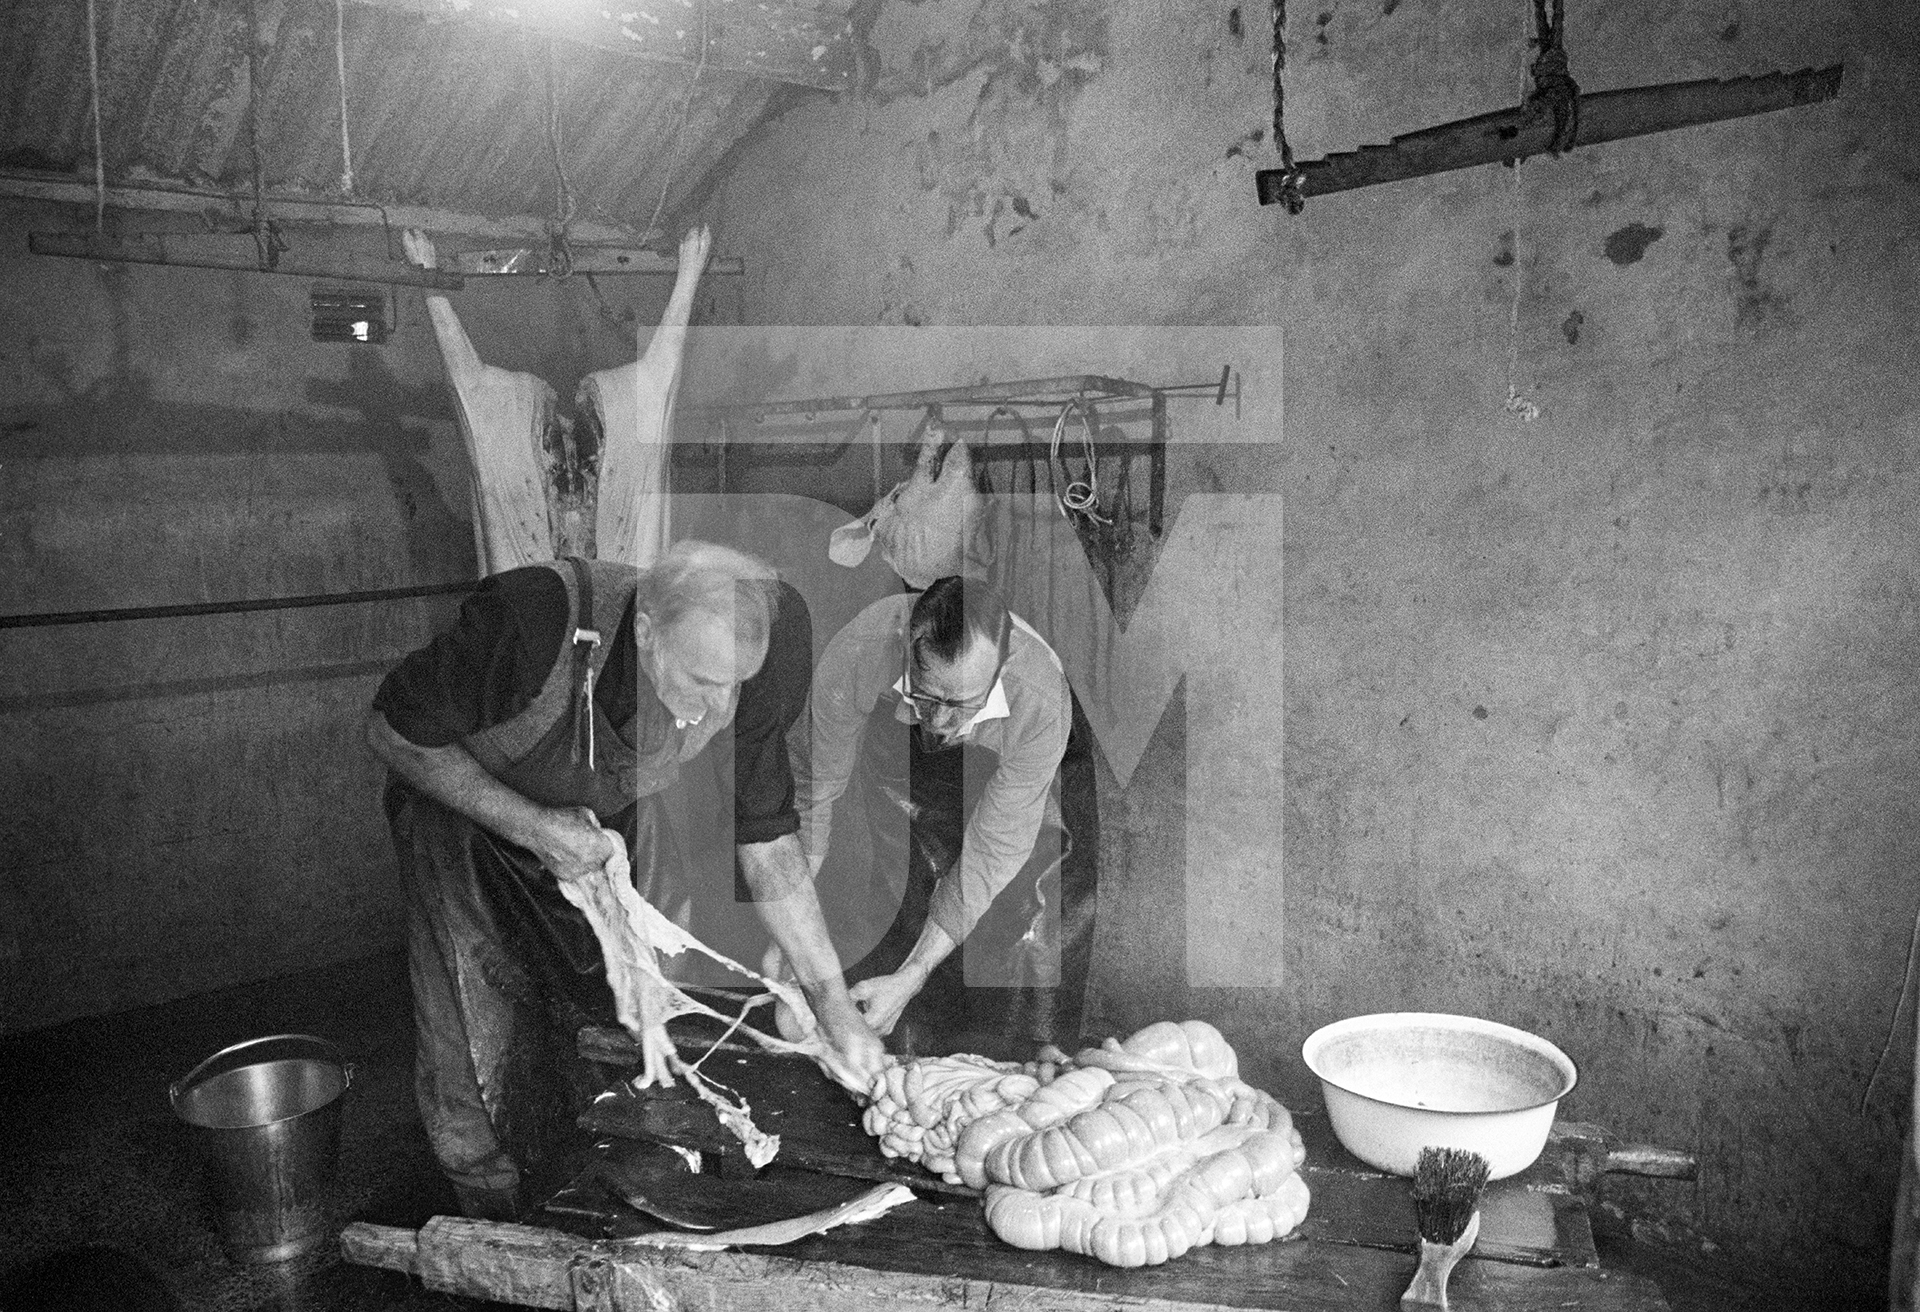 Separating the chitterlings. North Yorkshire 1976 by Daniel Meadows